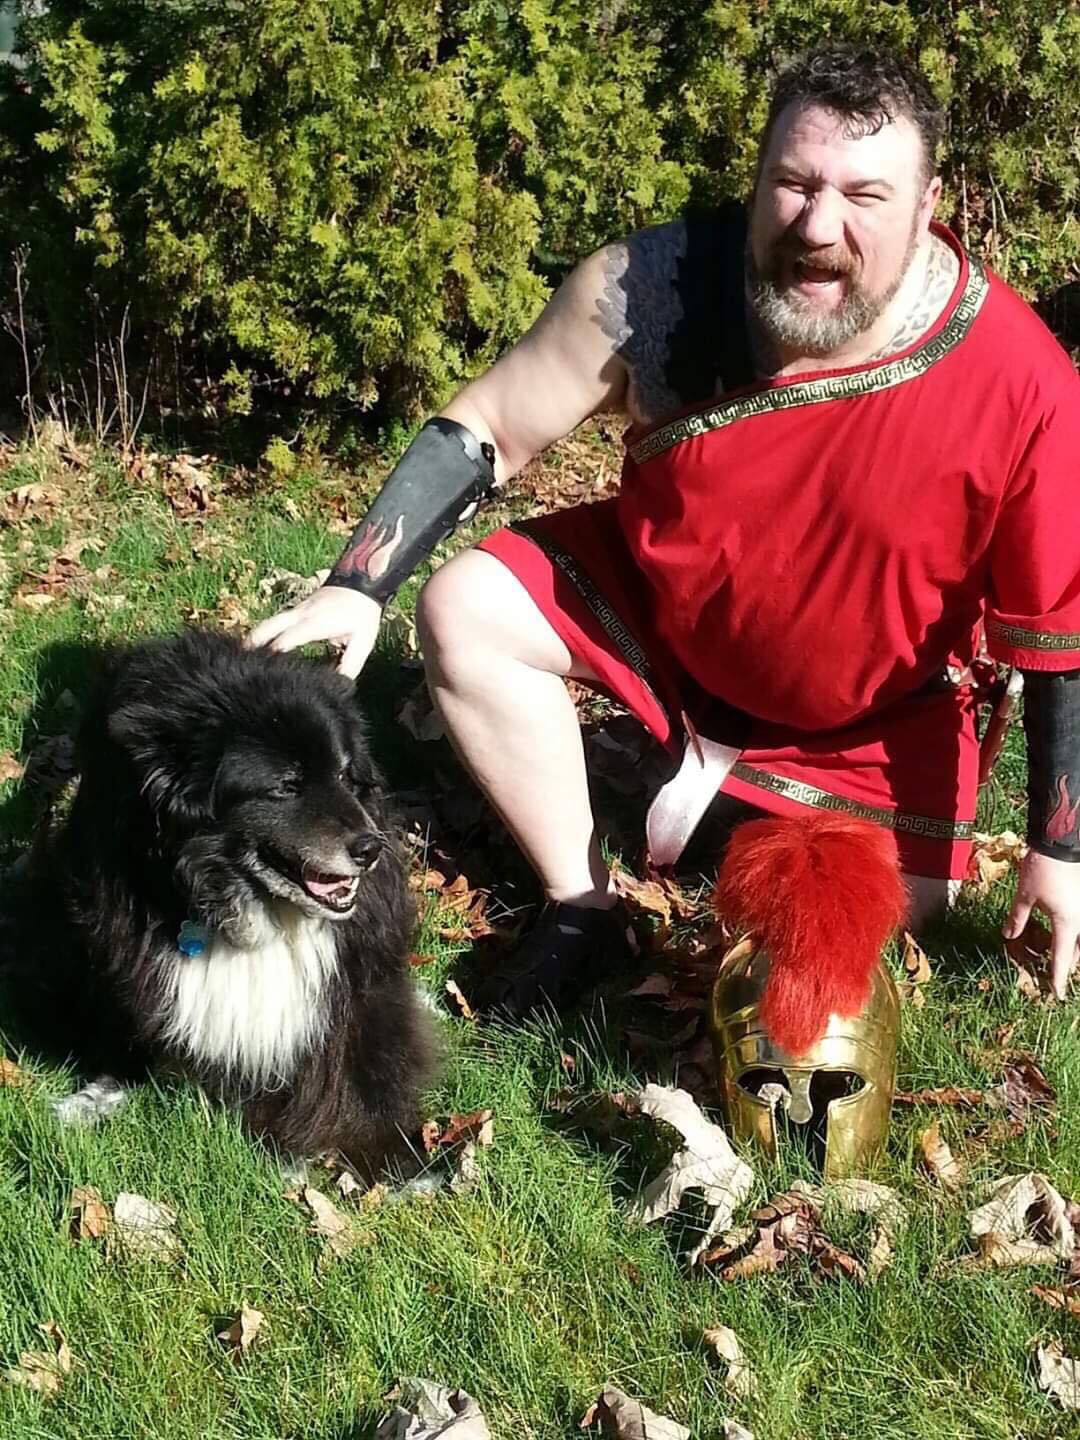 A man in a red shirt is kneeling down next to a black and white dog, representing Ares.